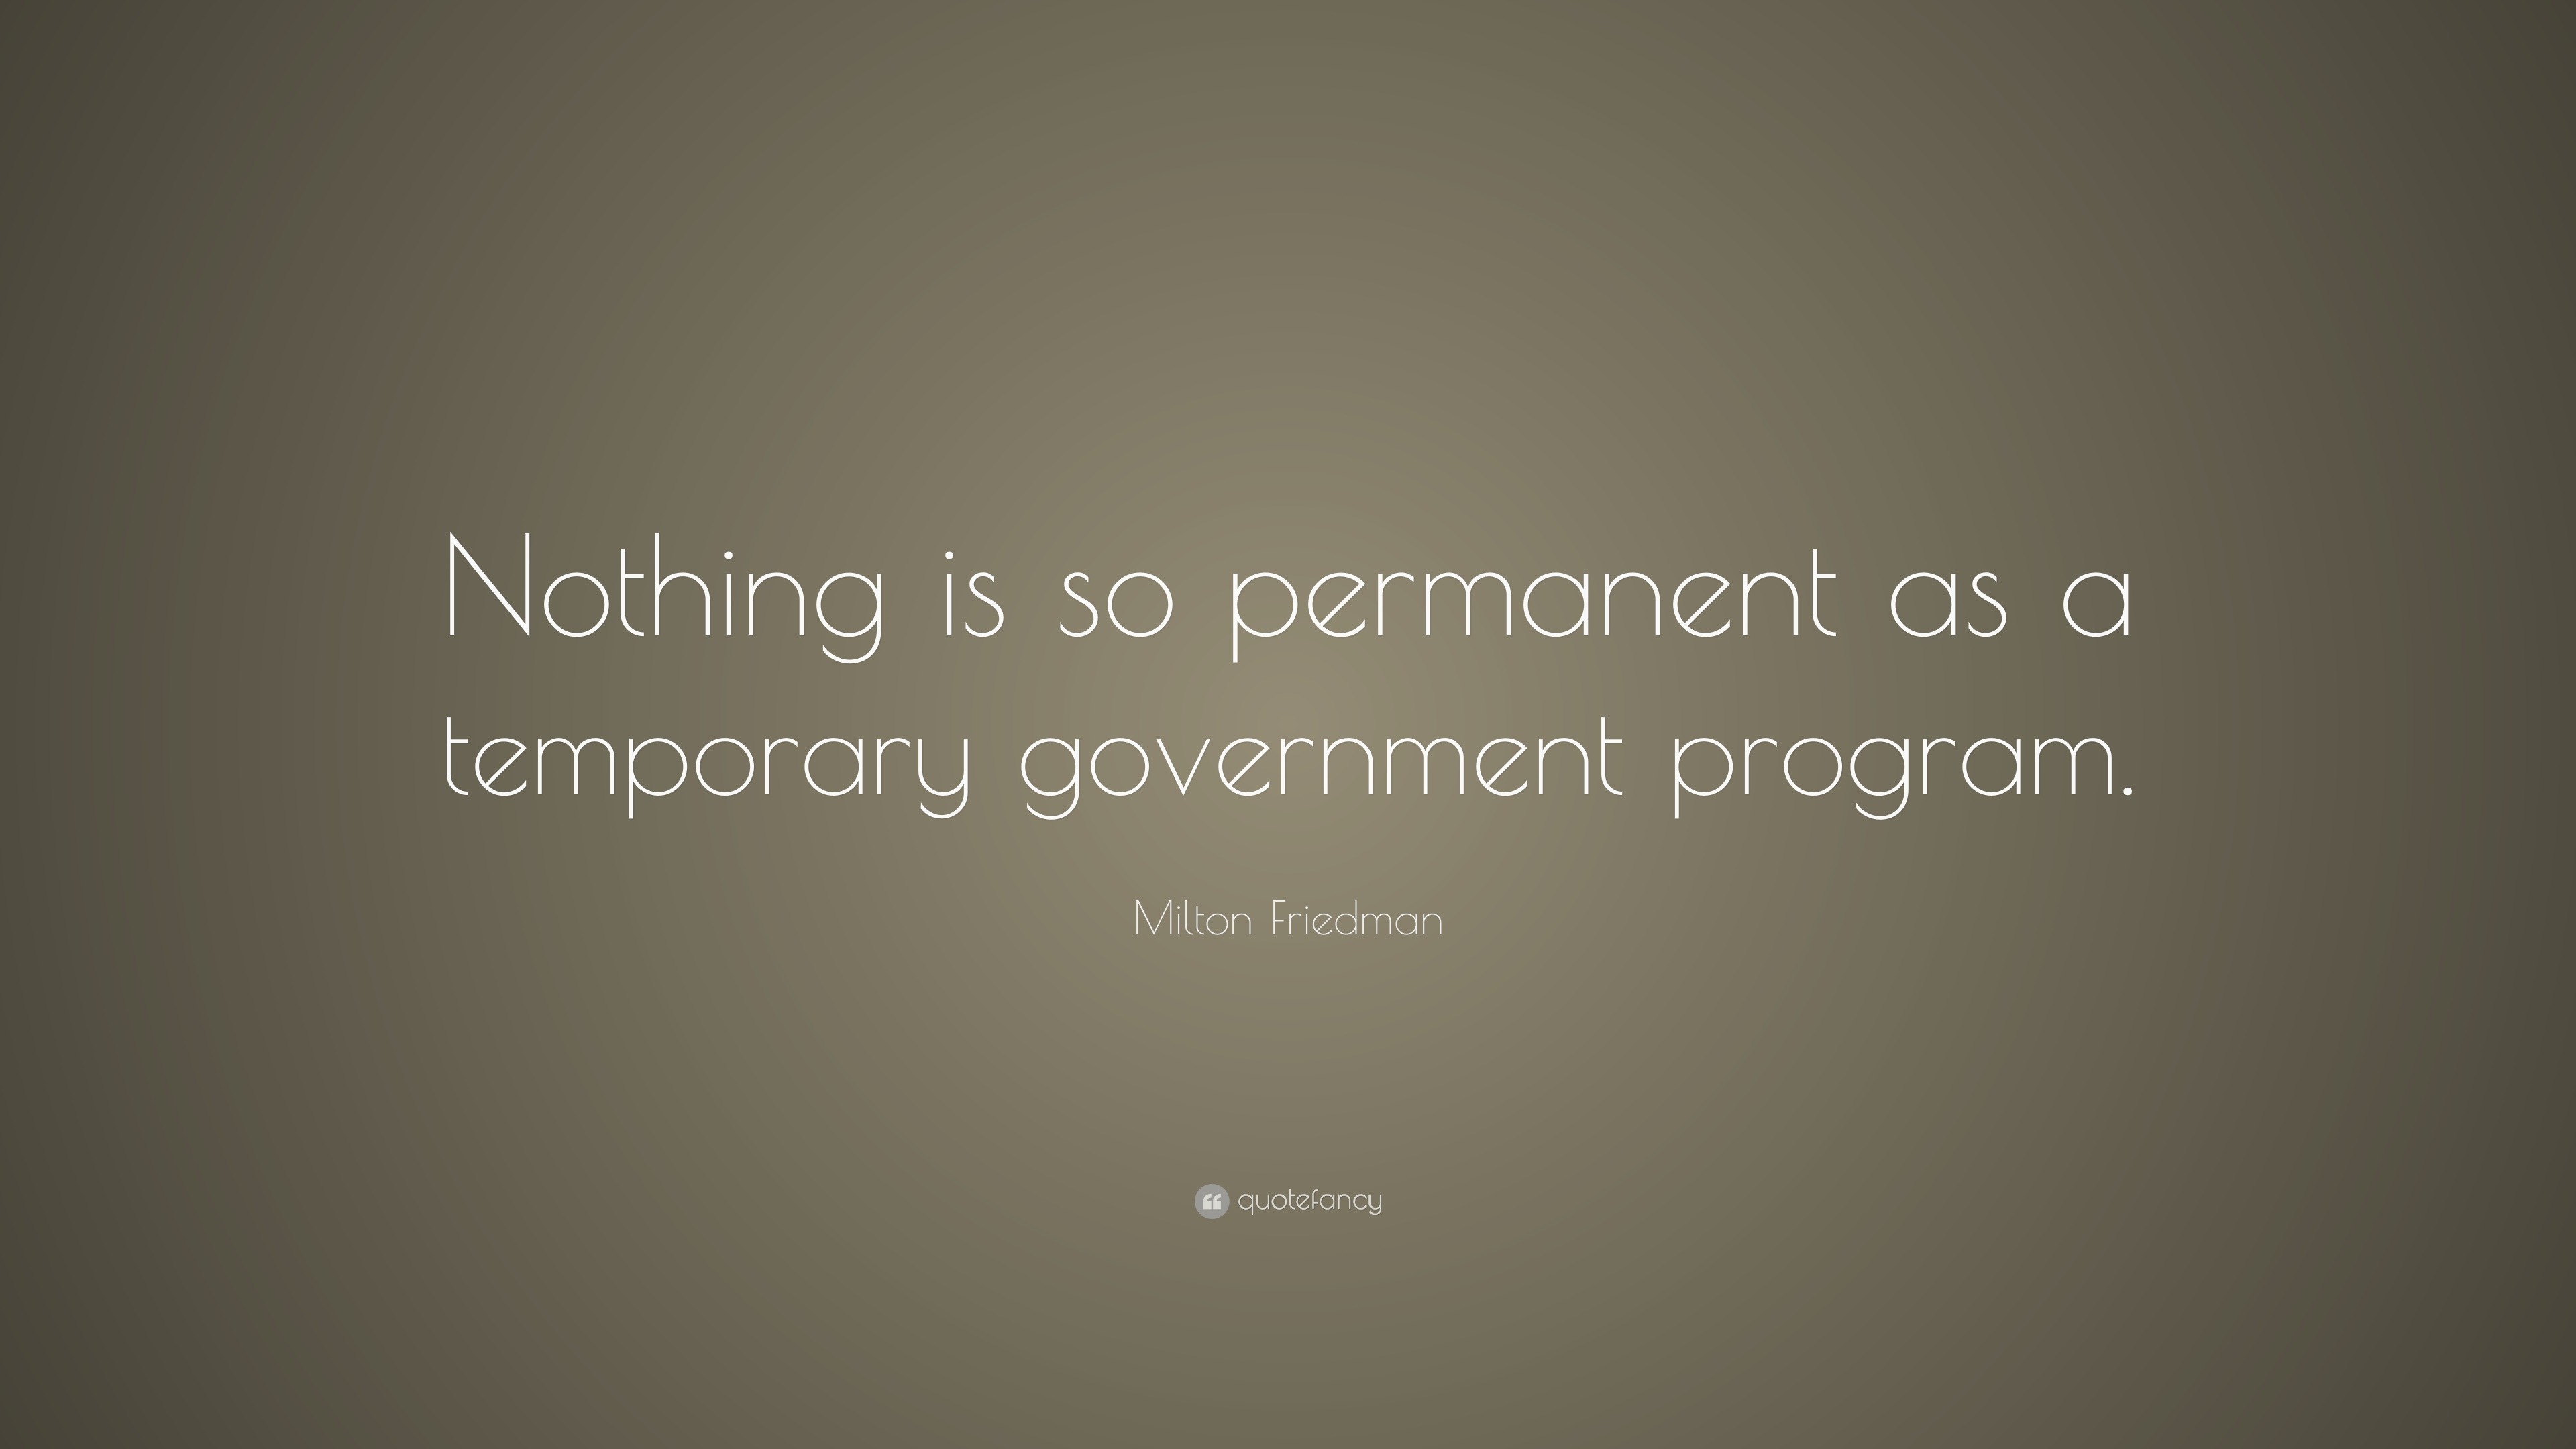 Milton Friedman Quote: “Nothing is so permanent as a temporary